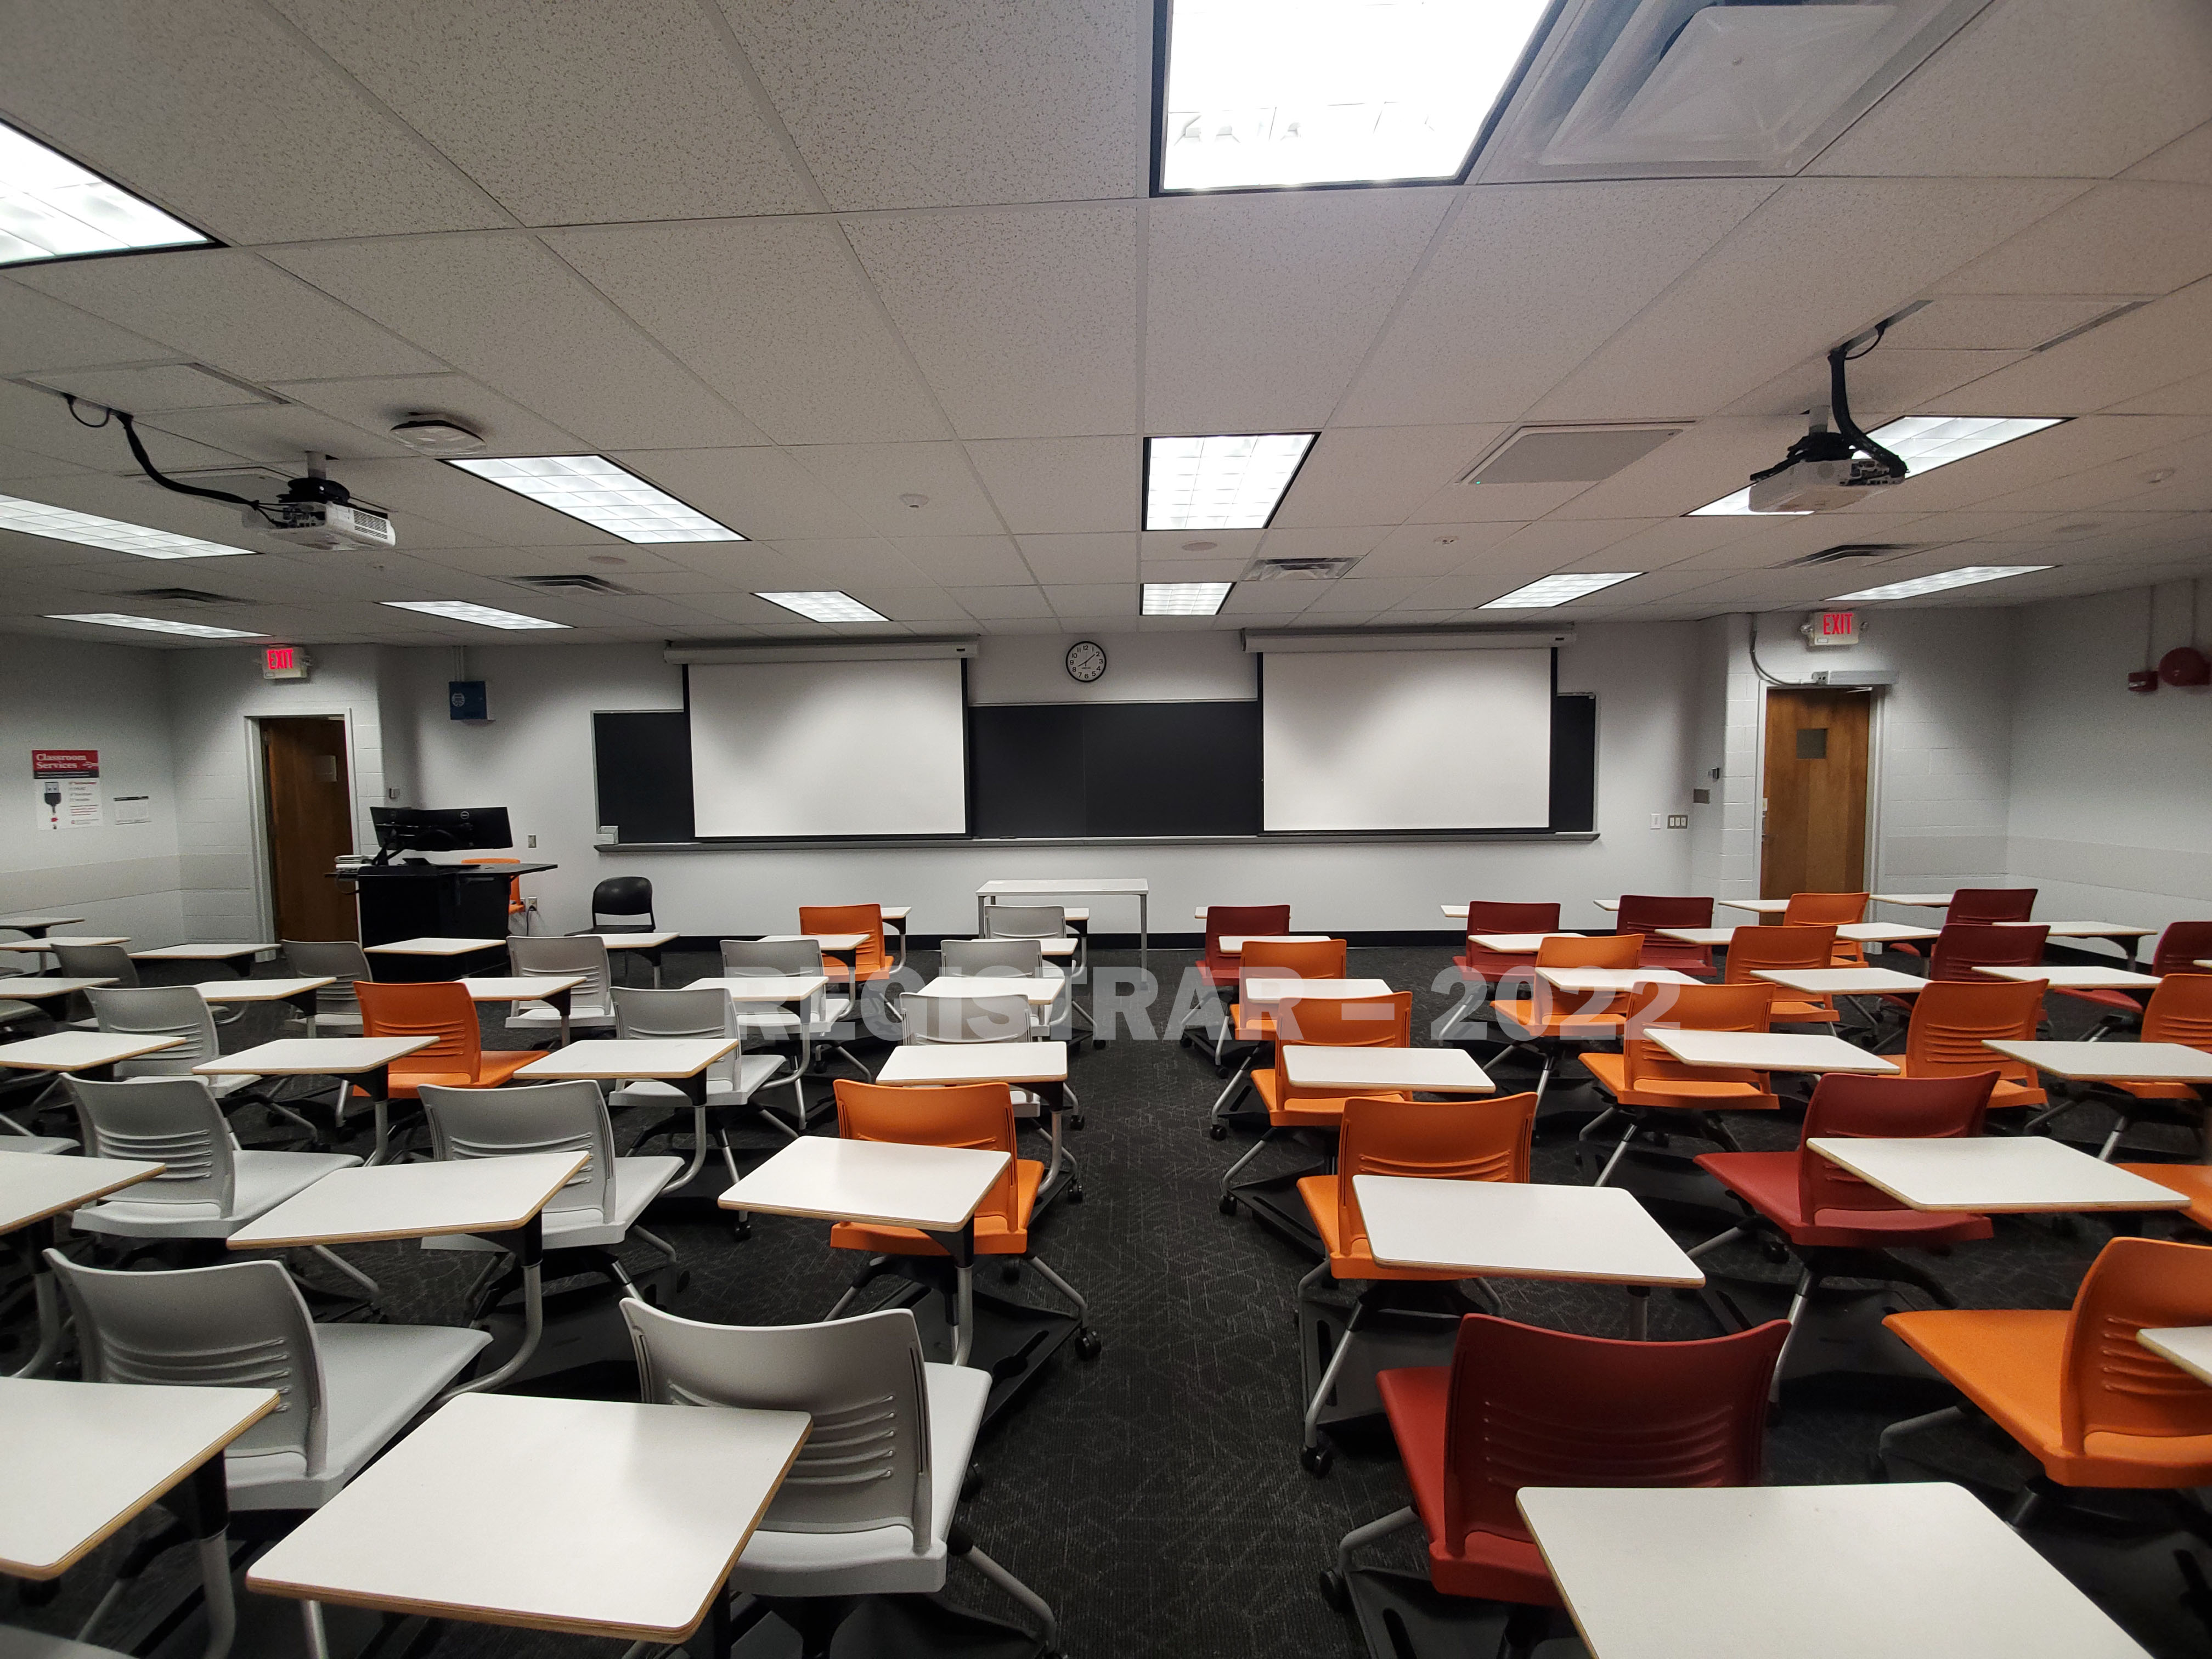 Journalism Building room 251 ultra wide angle view from the back of the room with projector screen down